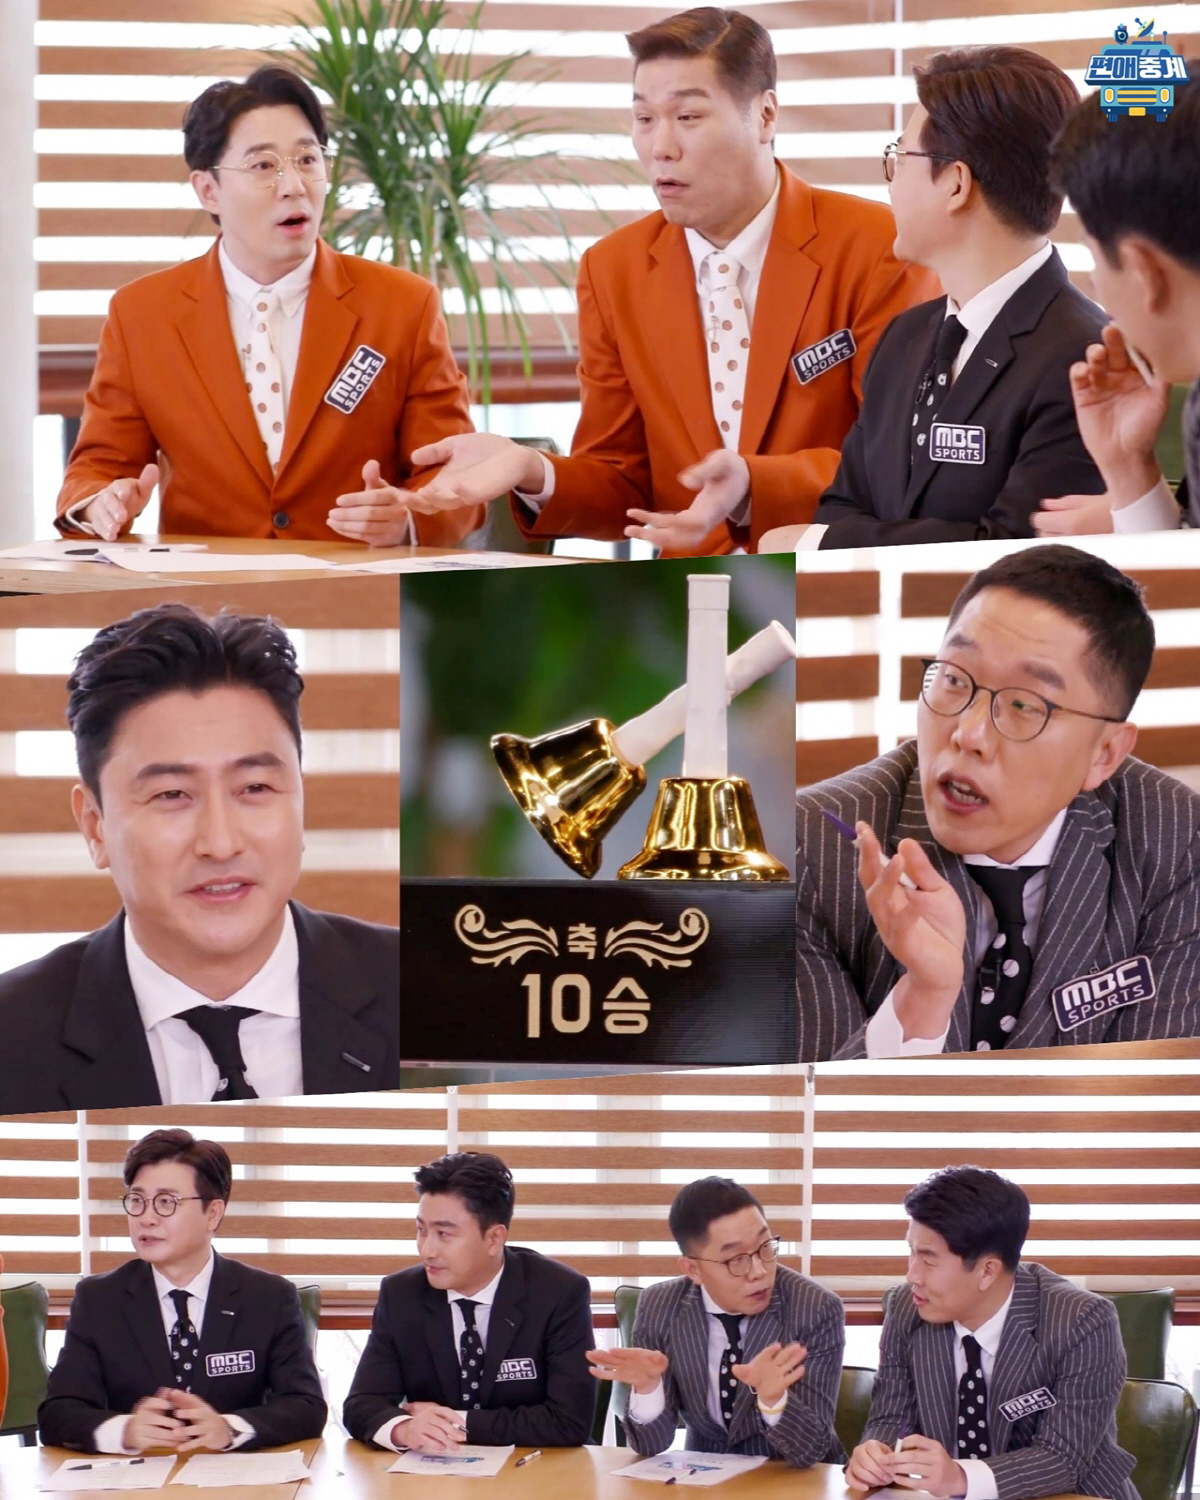 Roy transform...Ahn Jung-hwan and Tado Seo Jang-hoonMBC Favoritism later once again believes in the favoritism relay will be held.MBC Favoritism later tomorrow (27th), which predicts the top 1% of study and the bottom 1% of love, will be held on the battlefield opening where shooting between basketball teams, soccer teams and baseball teams is pouring.First, Boom is trying to follow Park Seo-joon toward Kim Je-dong, who has cut his head short with a hearty heart.Kim Je-dong, who appeared as a night-headed hairstyle that resembles Park Seo-joons Roy hairstyle, who collected hot topics with Itaewon Clath, got the nickname of similar Park Seo-joon and Roy.In addition, the limited edition Golden Goh Hae Jong for the relay who achieved the first 10 wins on the day appears, and the desire and check of the three teams are on the pole.In particular, Ahn Jung-hwan asks Jessie the condition that (the winning team) runs every time he hits the bell and runs errands and Kim Je-dong, who received it, asks, If you call the bell at home and hit the bell, you run.Seeing this, Seo Jang-hoon said, The two are four wins together. What confidence?His nose, which runs alone with six wins, has stabbed the sky and made the soccer team and the baseball team boil more.The basketball team, the soccer team and the baseball team that shout Tado basketball team together, are expecting a turbulent journey to achieve 10 wins first and hold Golden Kuhaejong in hand.On the other hand, MBC Favoritism later, which is broadcasted tomorrow (27th), will start to make girlfriends of Seoul National University, Yonsei University, and KAIST mother solo players as the first meeting of my life opposite to the last twilight meeting of my life.Photos Offer: MBC